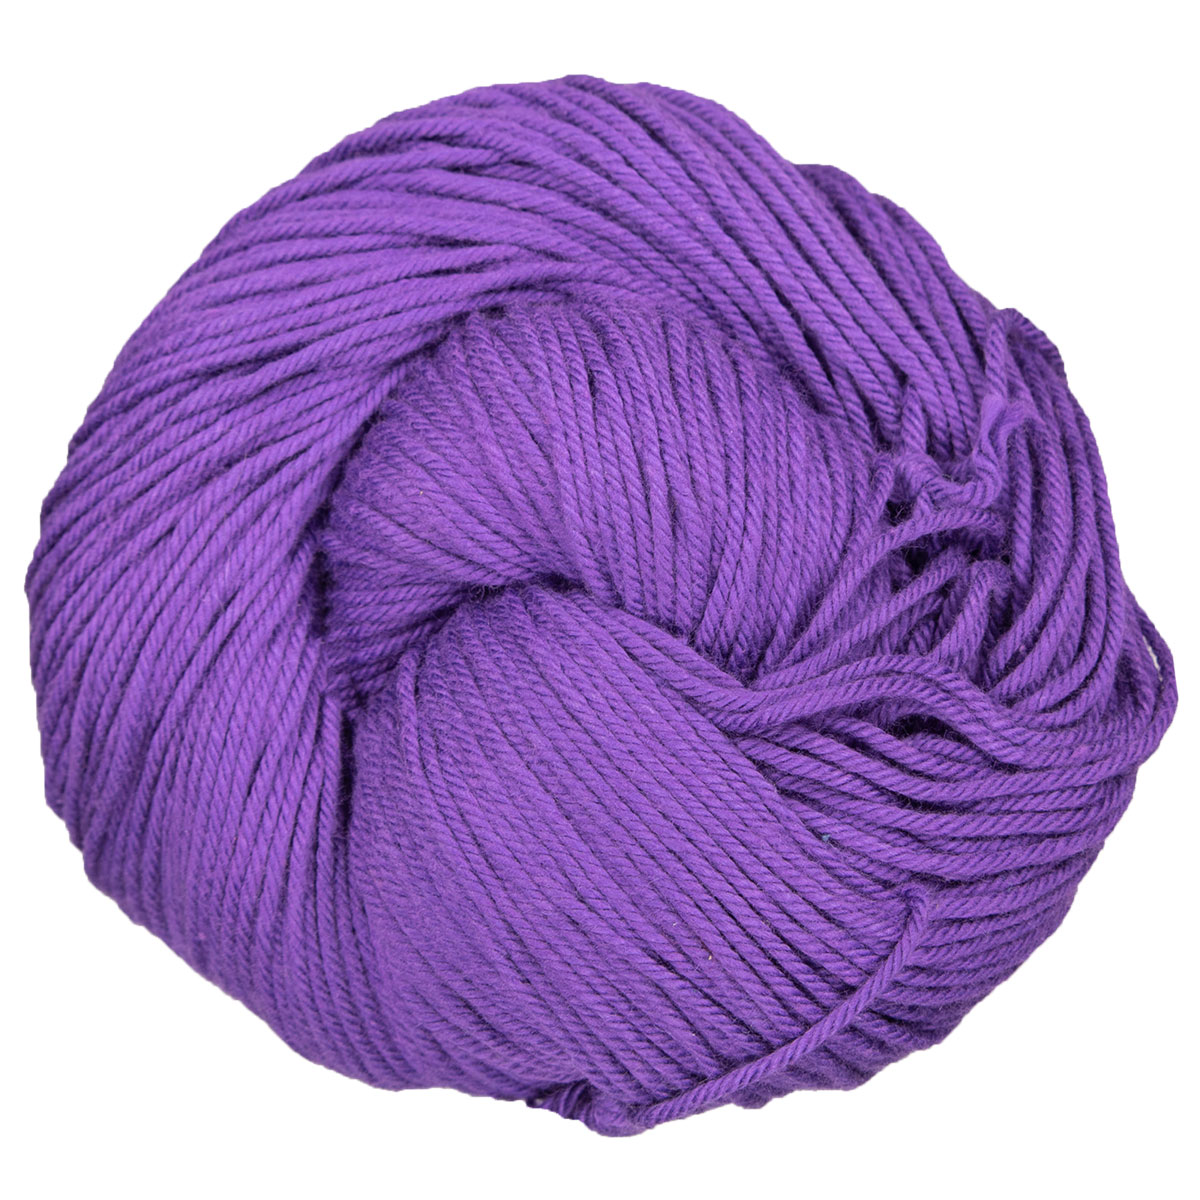 Cascade Nifty Cotton Yarn - 28 Purple Video Reviews at Jimmy Beans